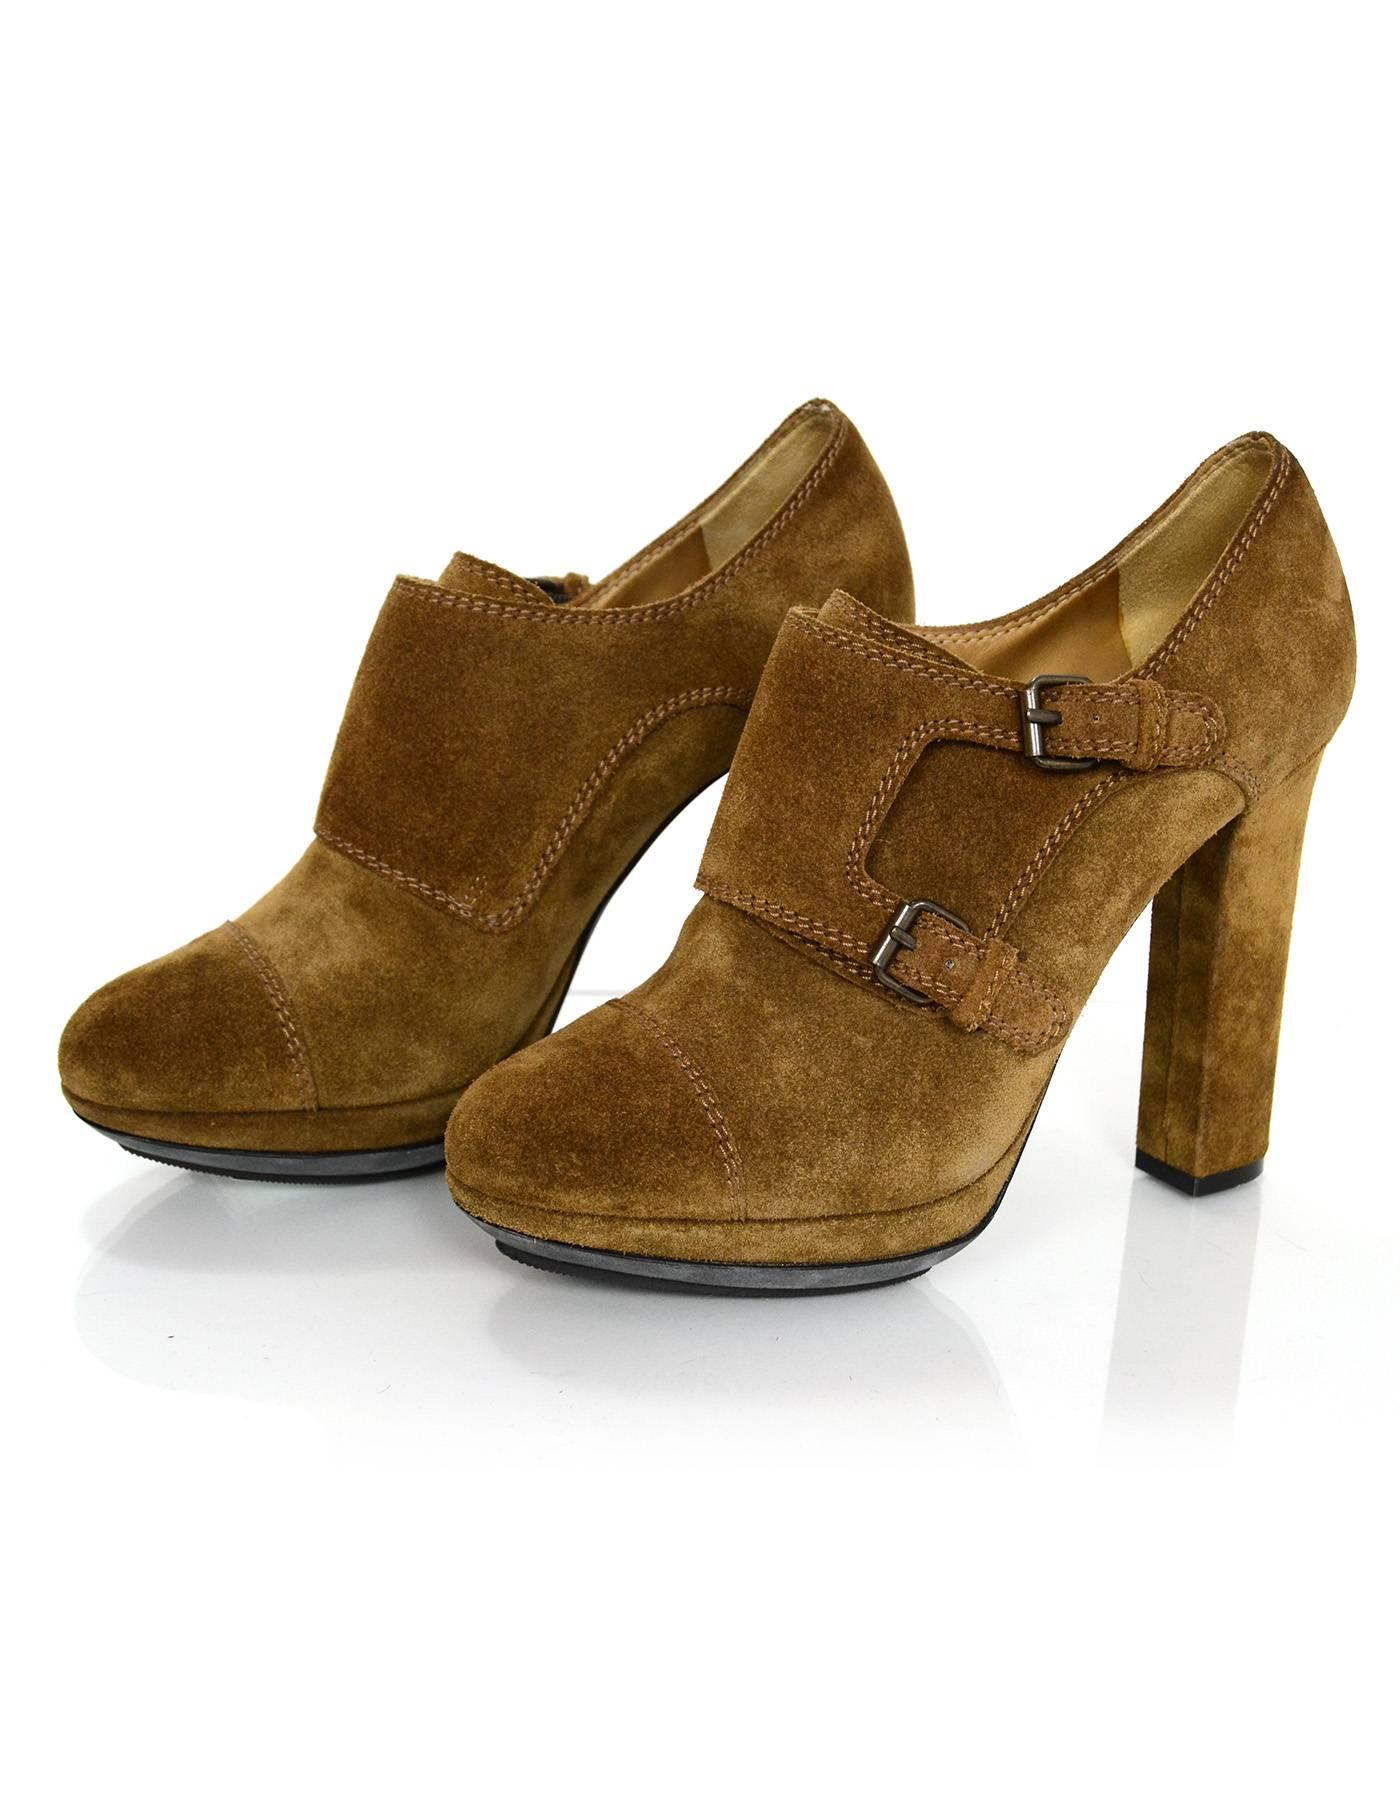 Lanvin Tan Suede Booties Sz 37

Made In: Italy
Color: Tan
Materials: Suede
Closure/Opening: Buckles at vamp
Sole Stamp: Vero cuoio made in italy 37
Overall Condition: Excellent pre-owned 

Marked Size: 37
Heel Height: 4.25"
Platform: .5"
